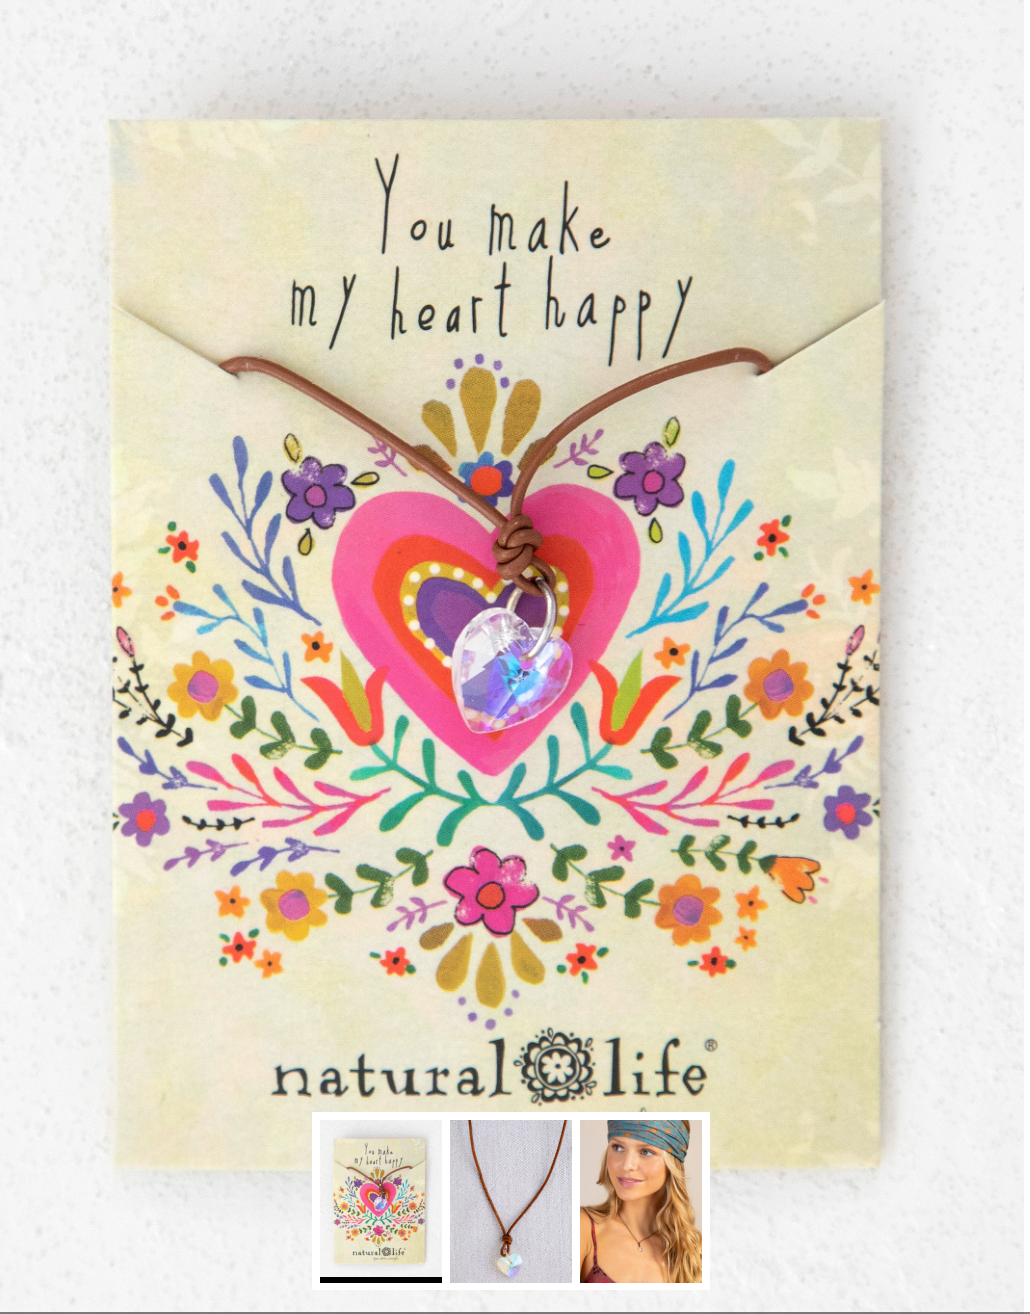 Natural Life - Accessories